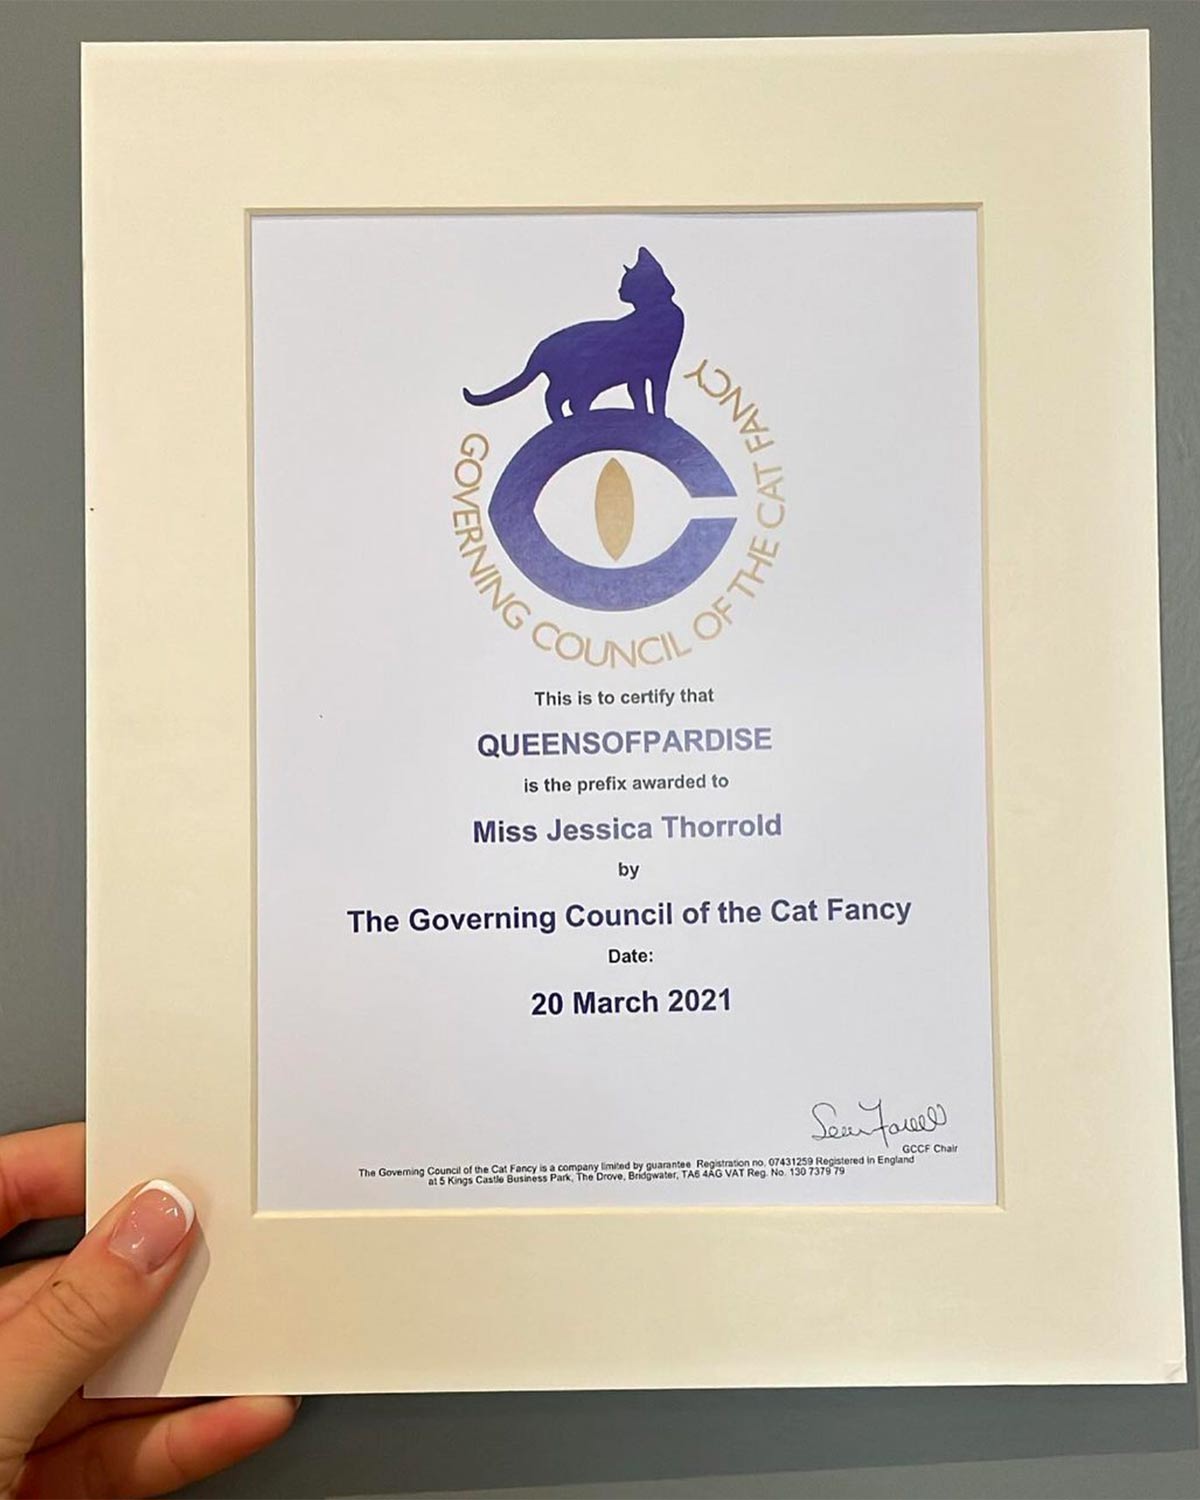 The Governing Council of the Cat Fancy - Certificate